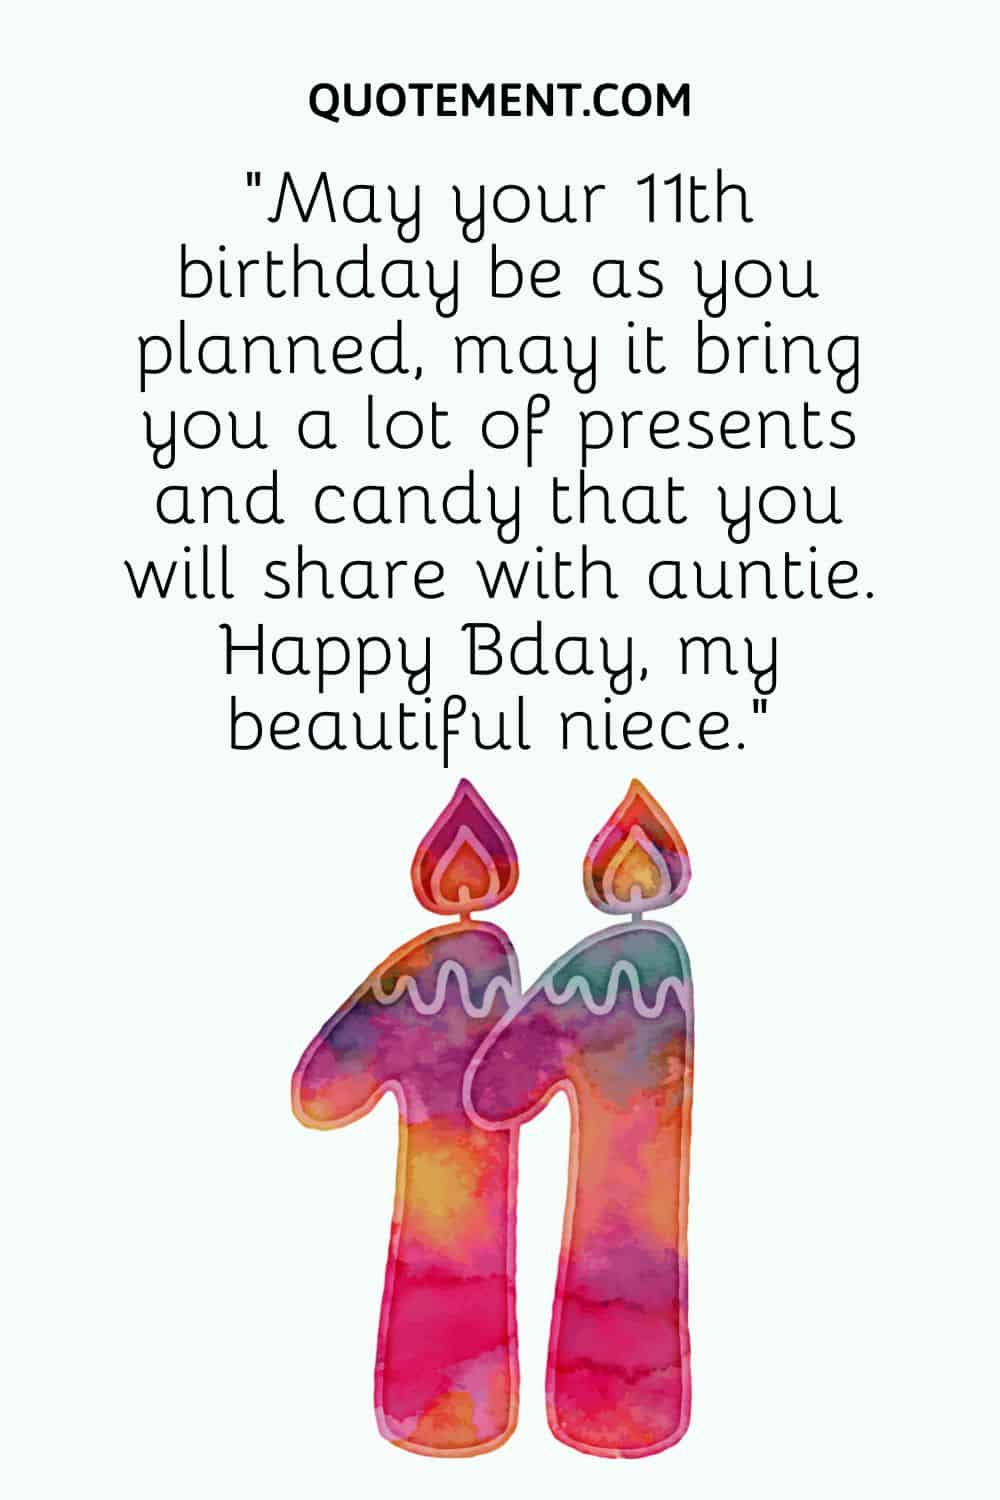 “May your 11th birthday be as you planned, may it bring you a lot of presents and candy that you will share with auntie. Happy Bday, my beautiful niece.”